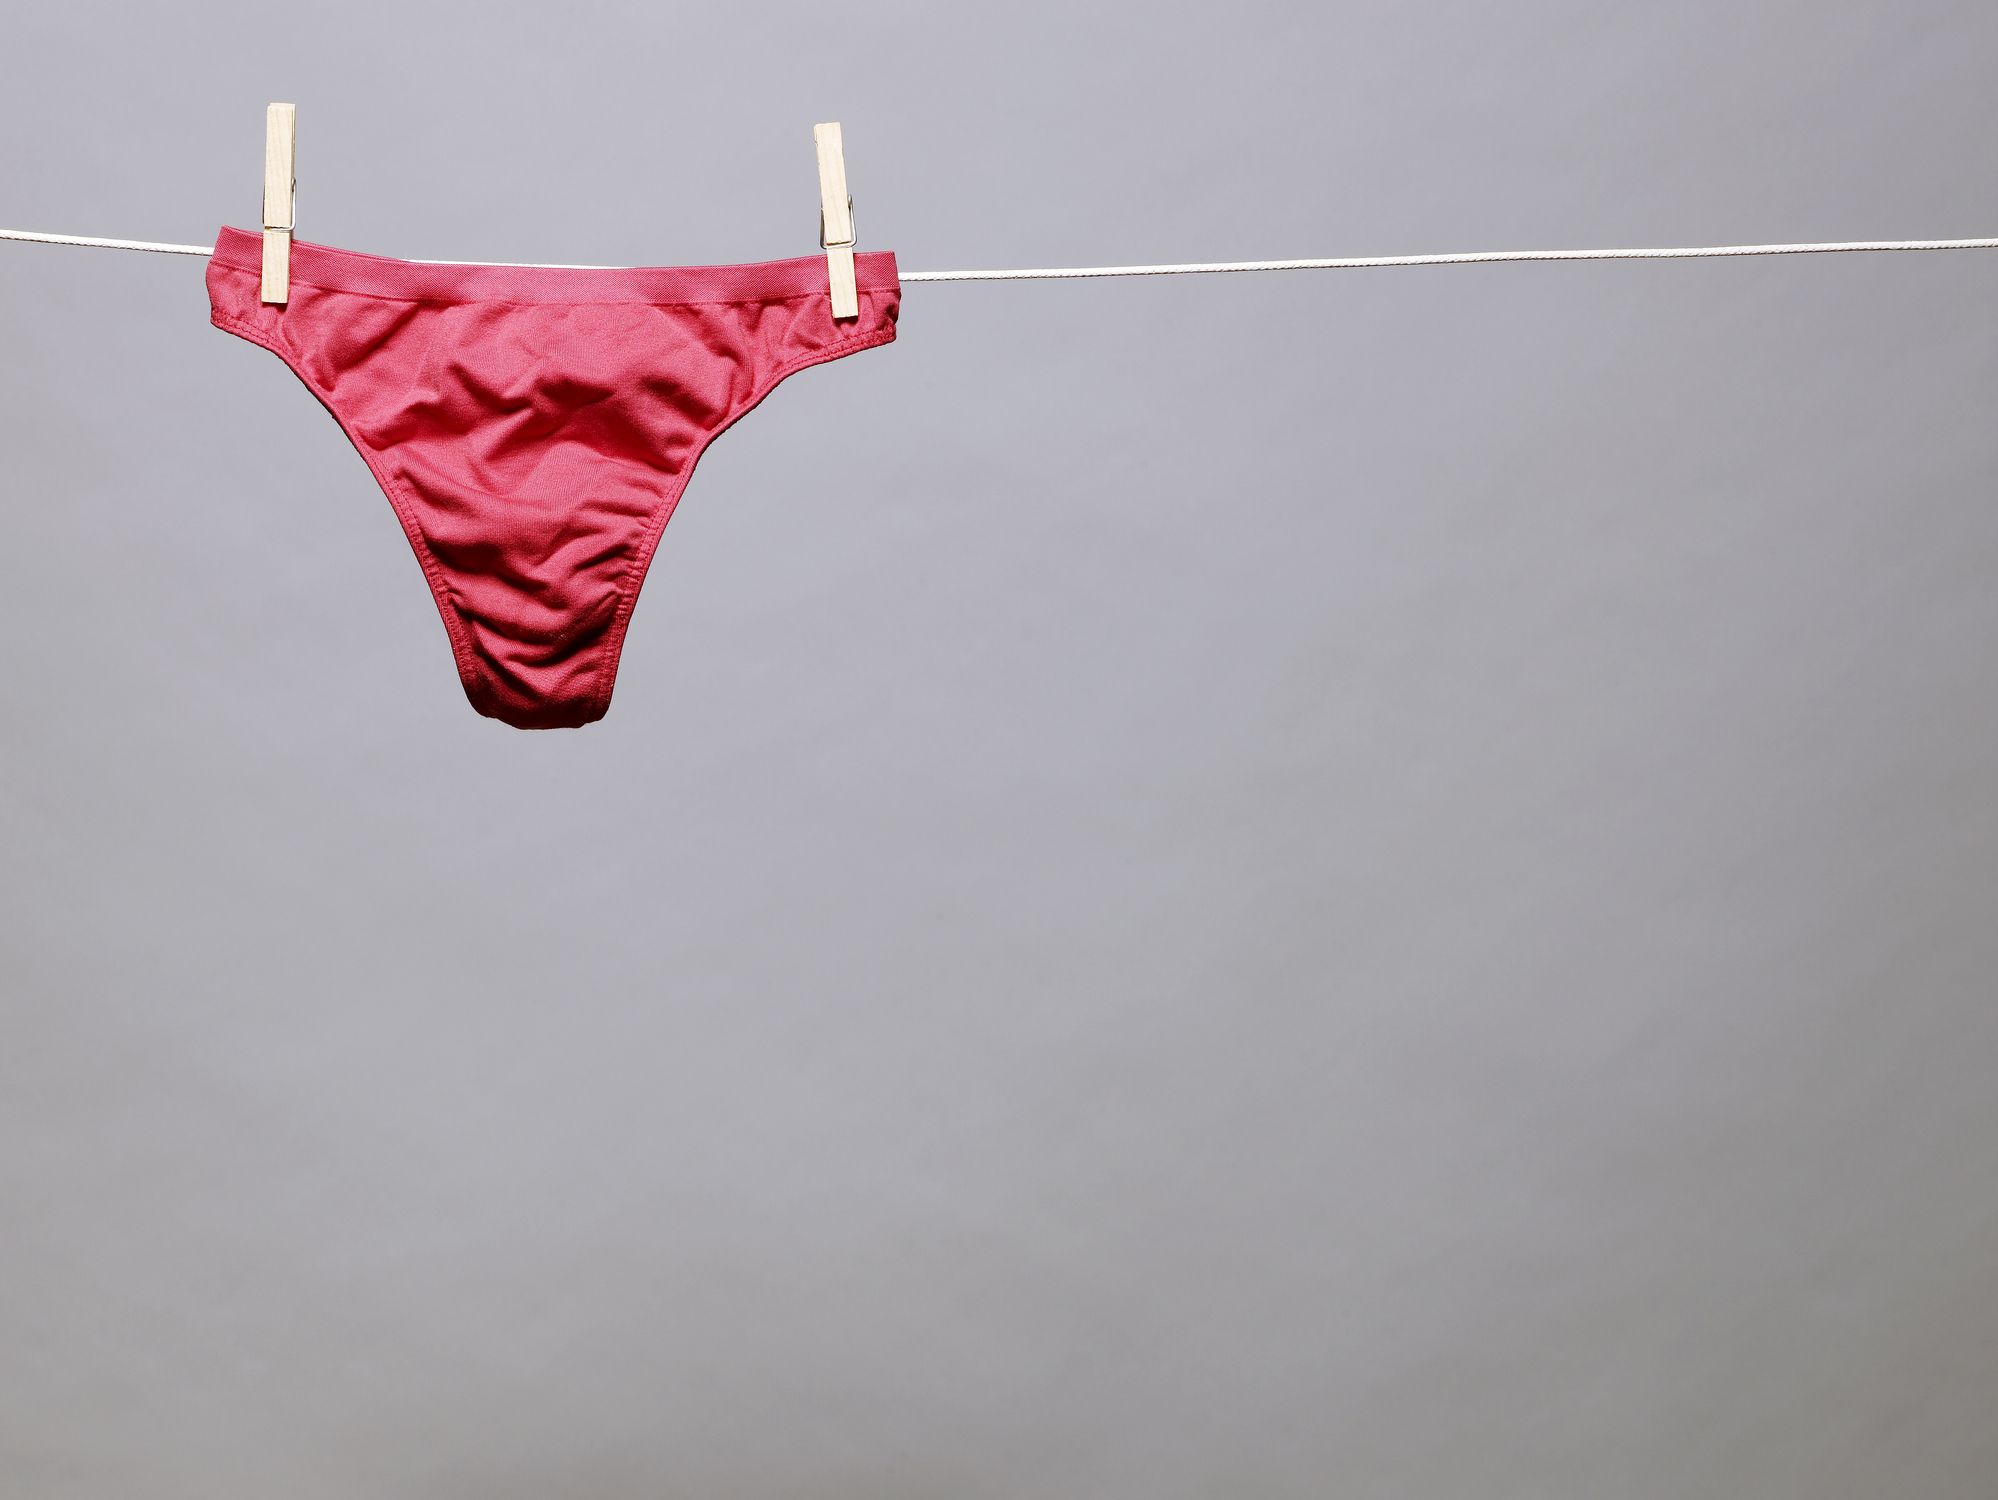 Women's Panties for sale in Mount Airy, North Carolina